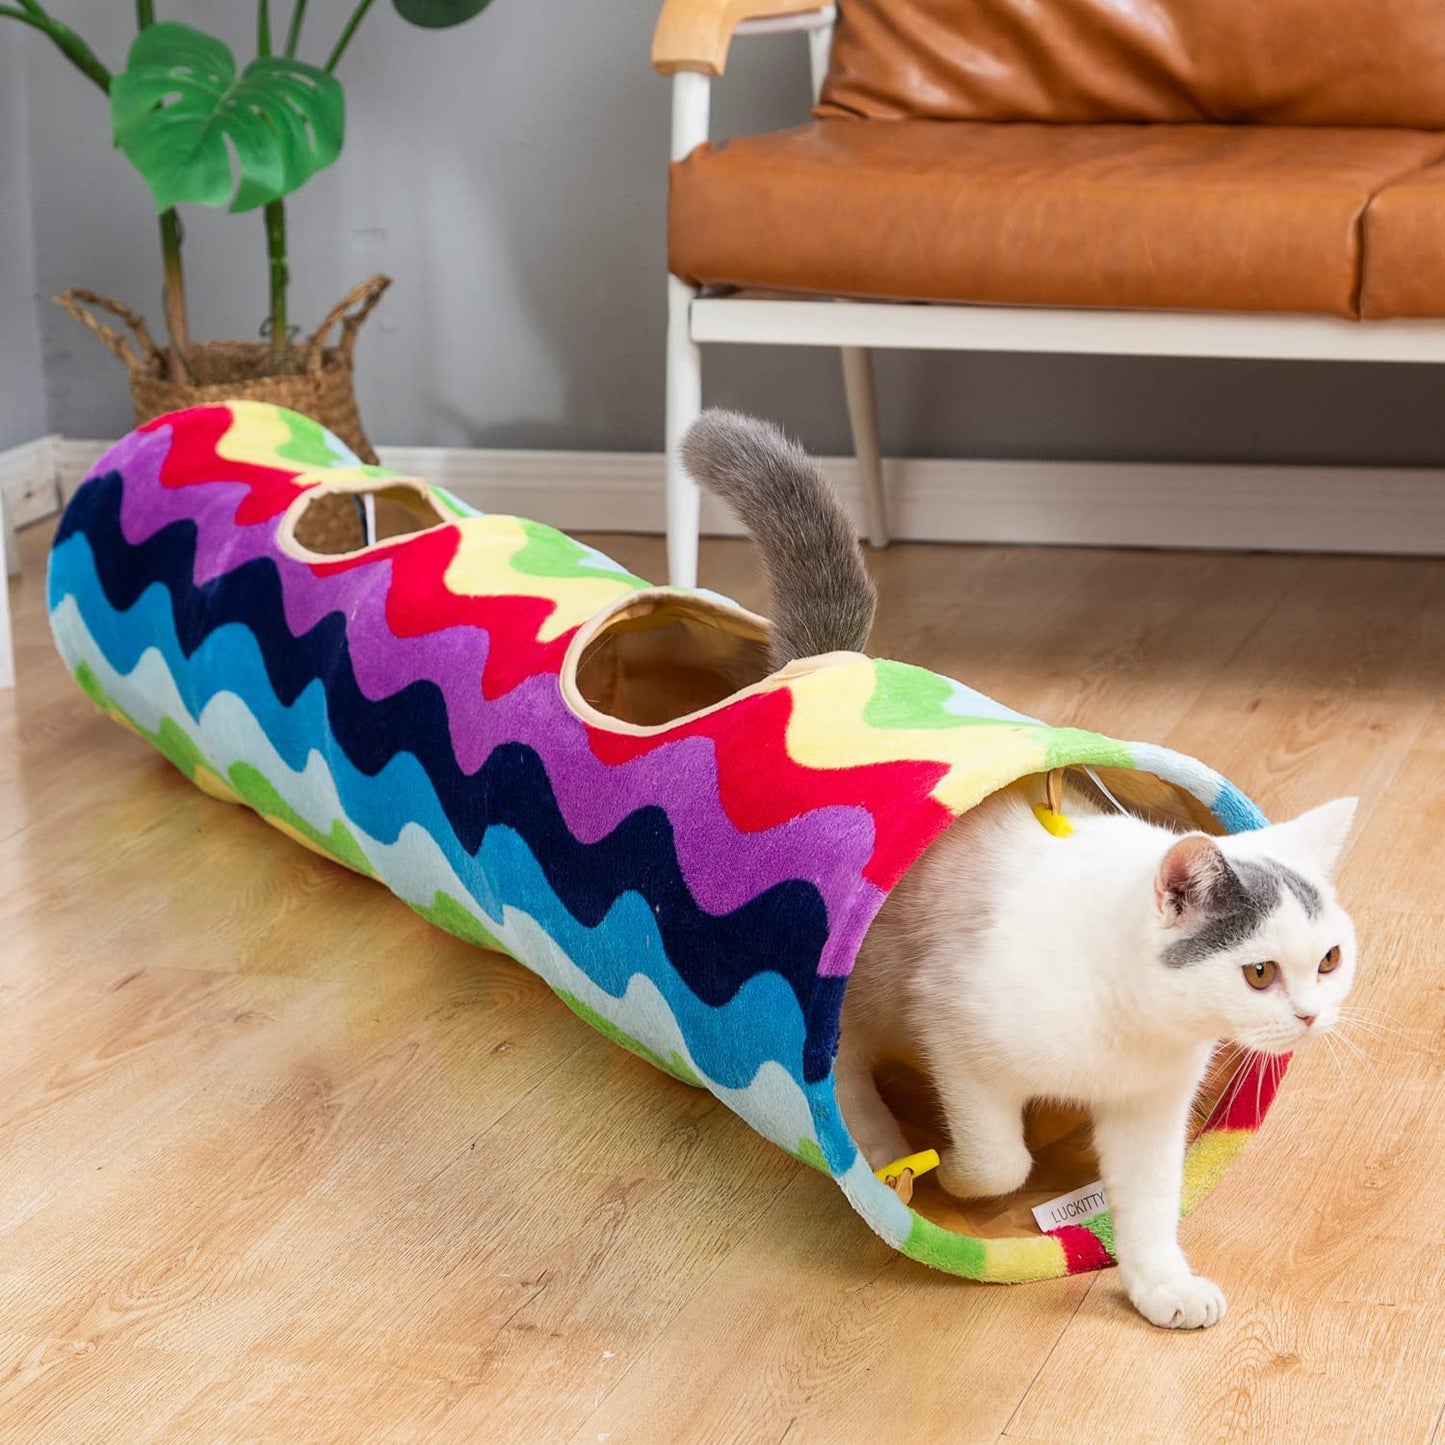 LUCKITTY Cat Tunnel -Straight-Shaped, Rainbow Wave Color, Soft Velvet Exterior, Oxford Fabric Fog-Proof Interior, Plush Toy Ball, Easily Washable, Conveniently Foldable, 47.2In/120Cm